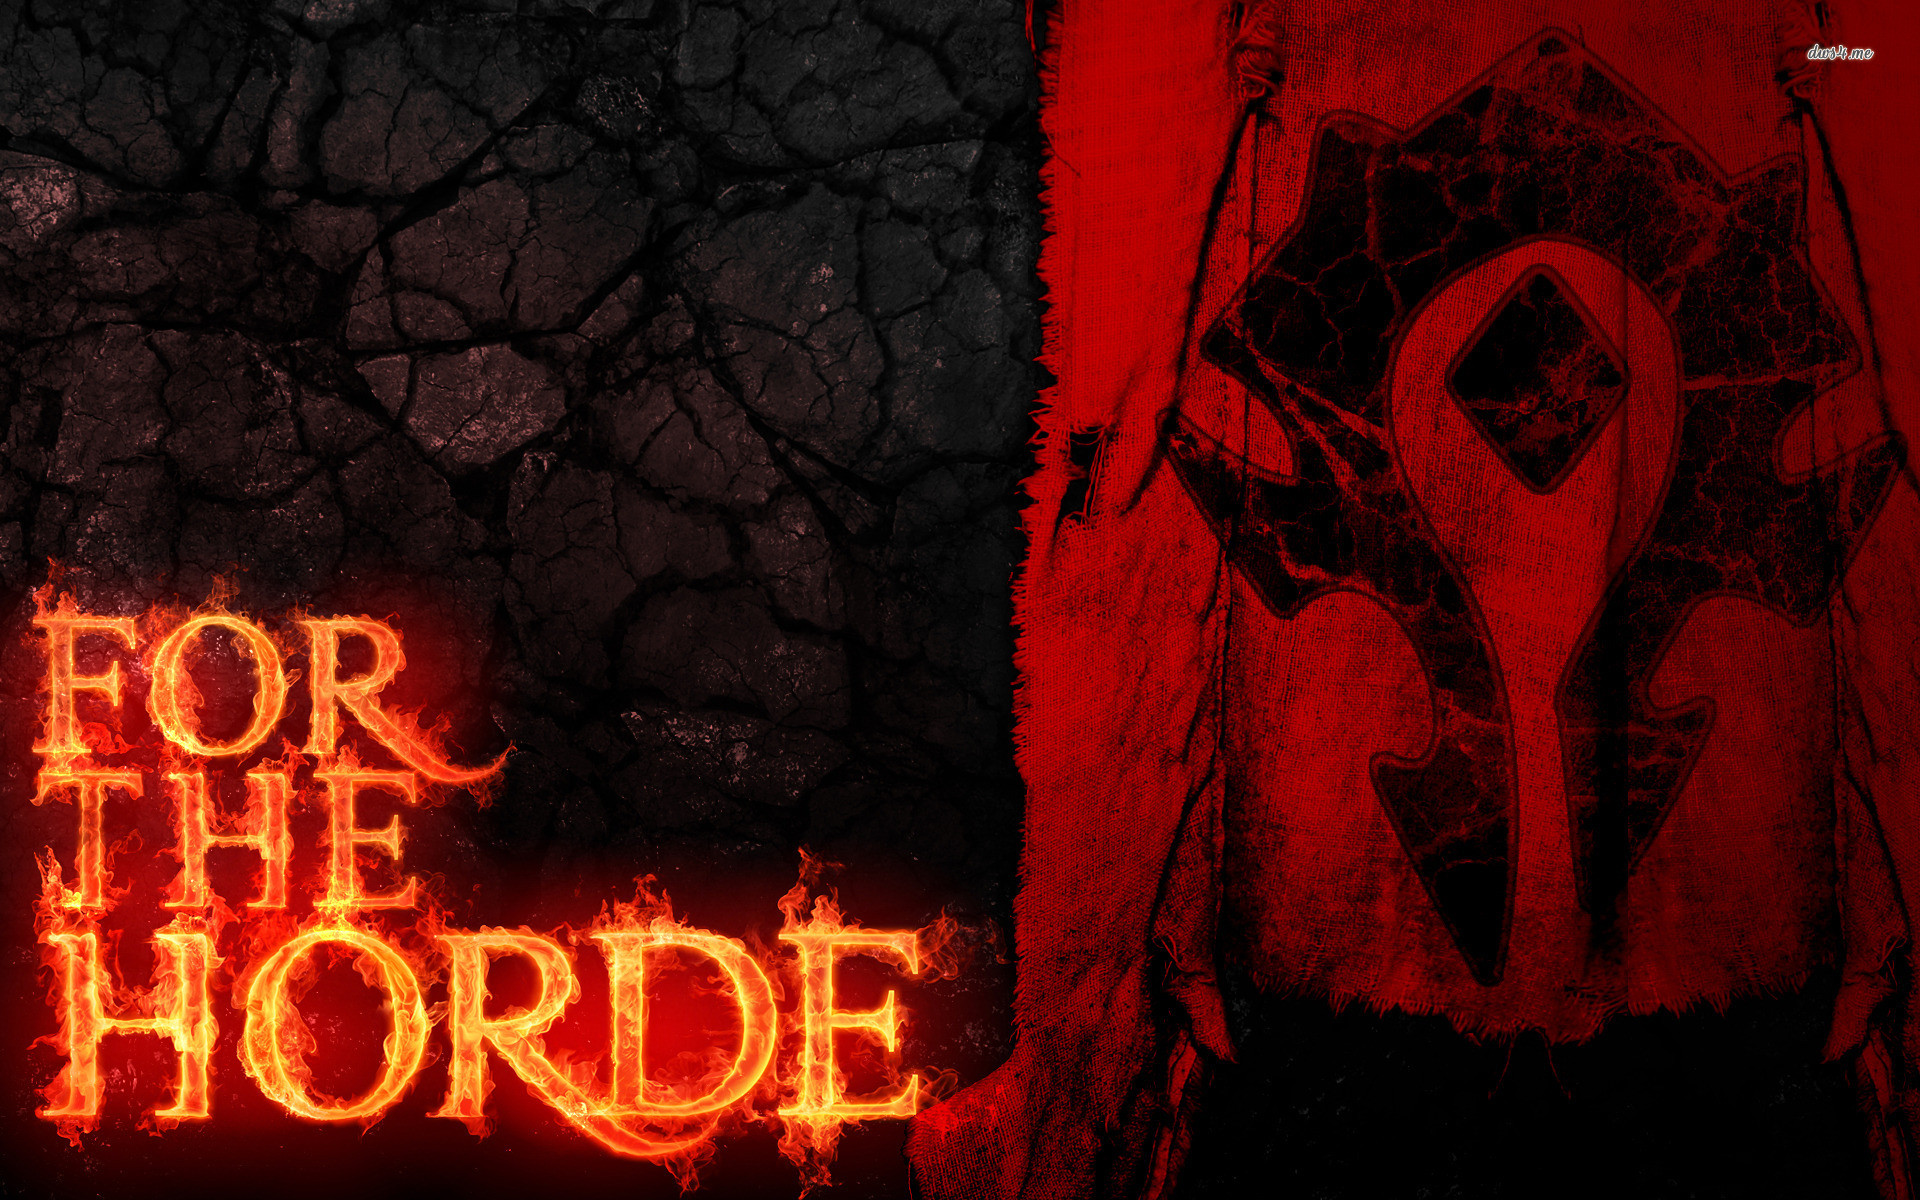 1920x1200 ... World of Horde Wallpapers - Full HD wallpaper search